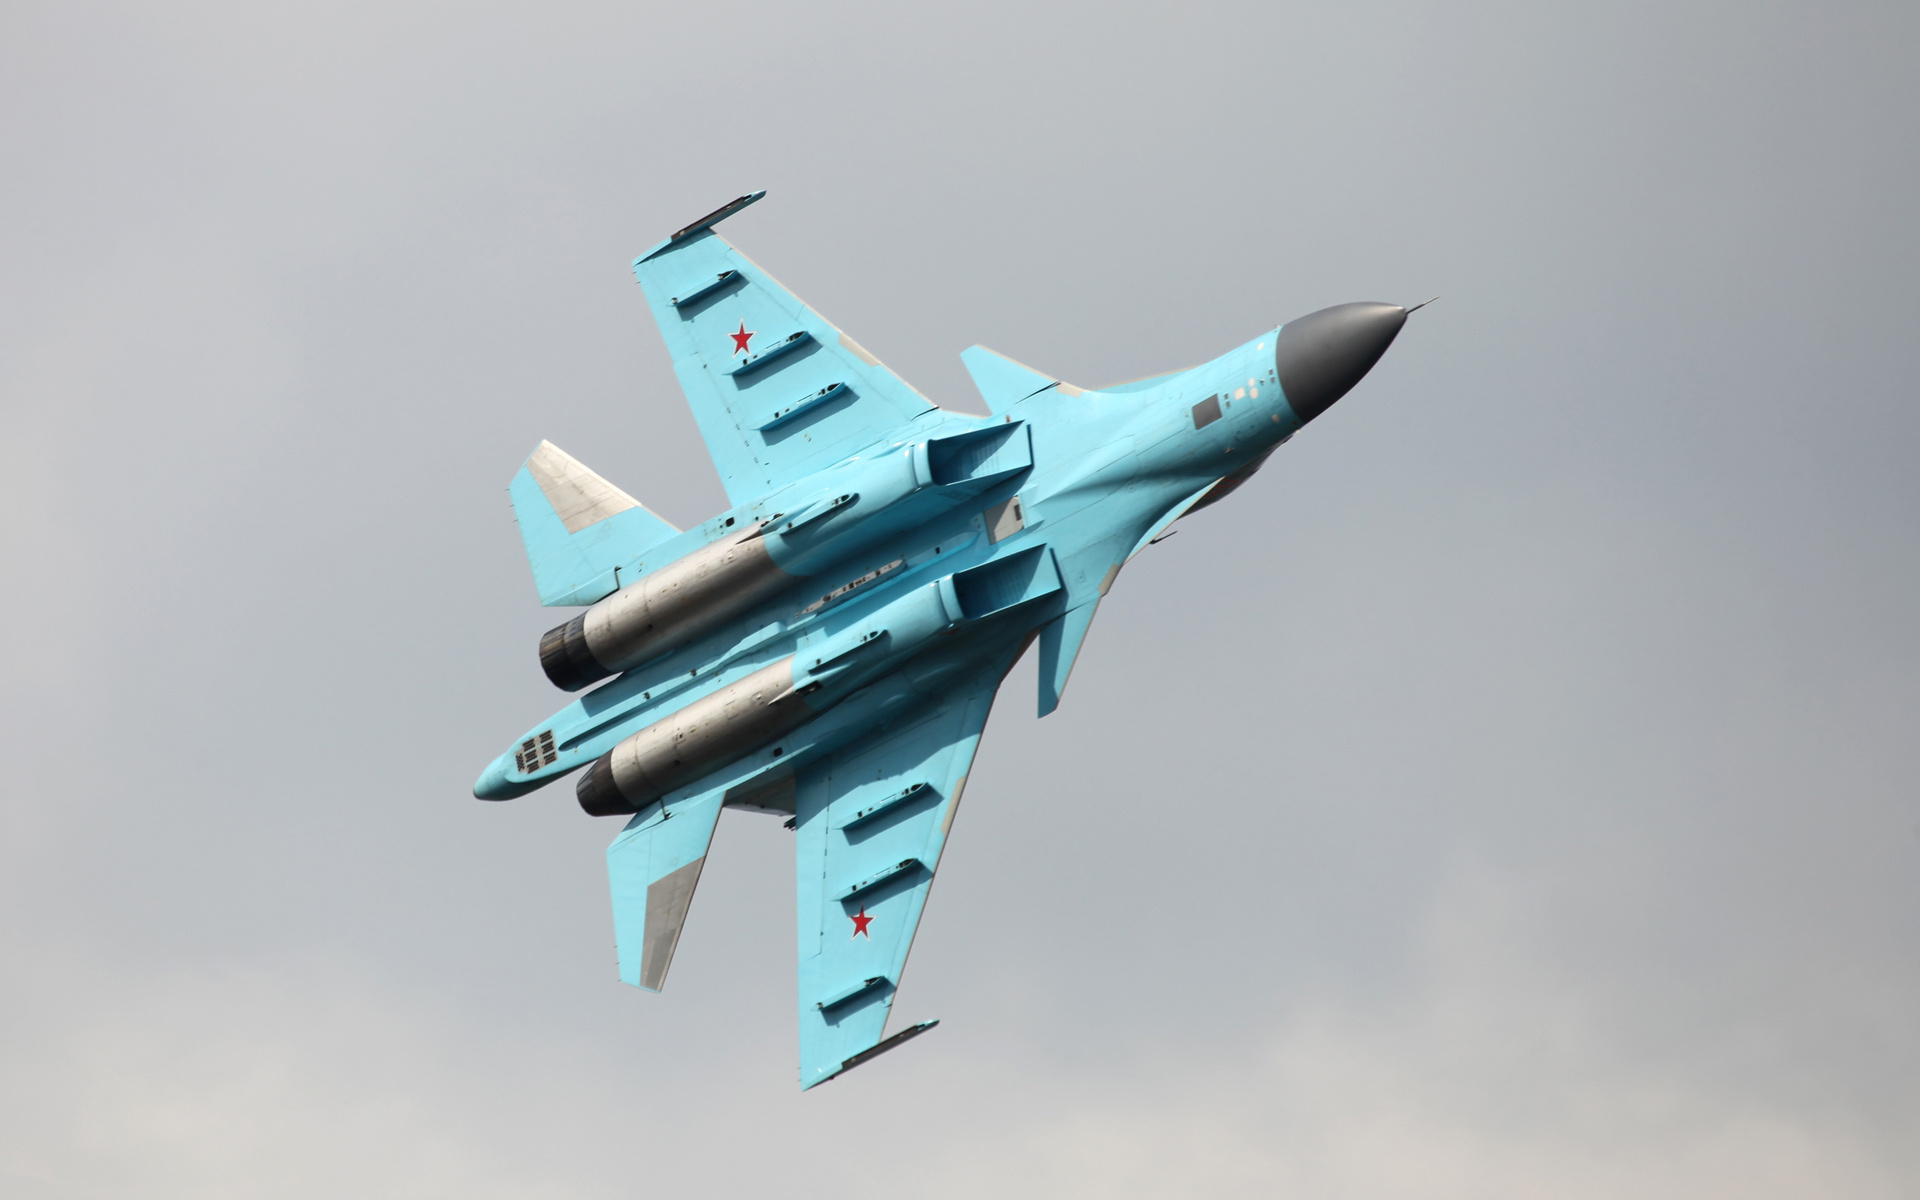 military, sukhoi su 34, jet fighters